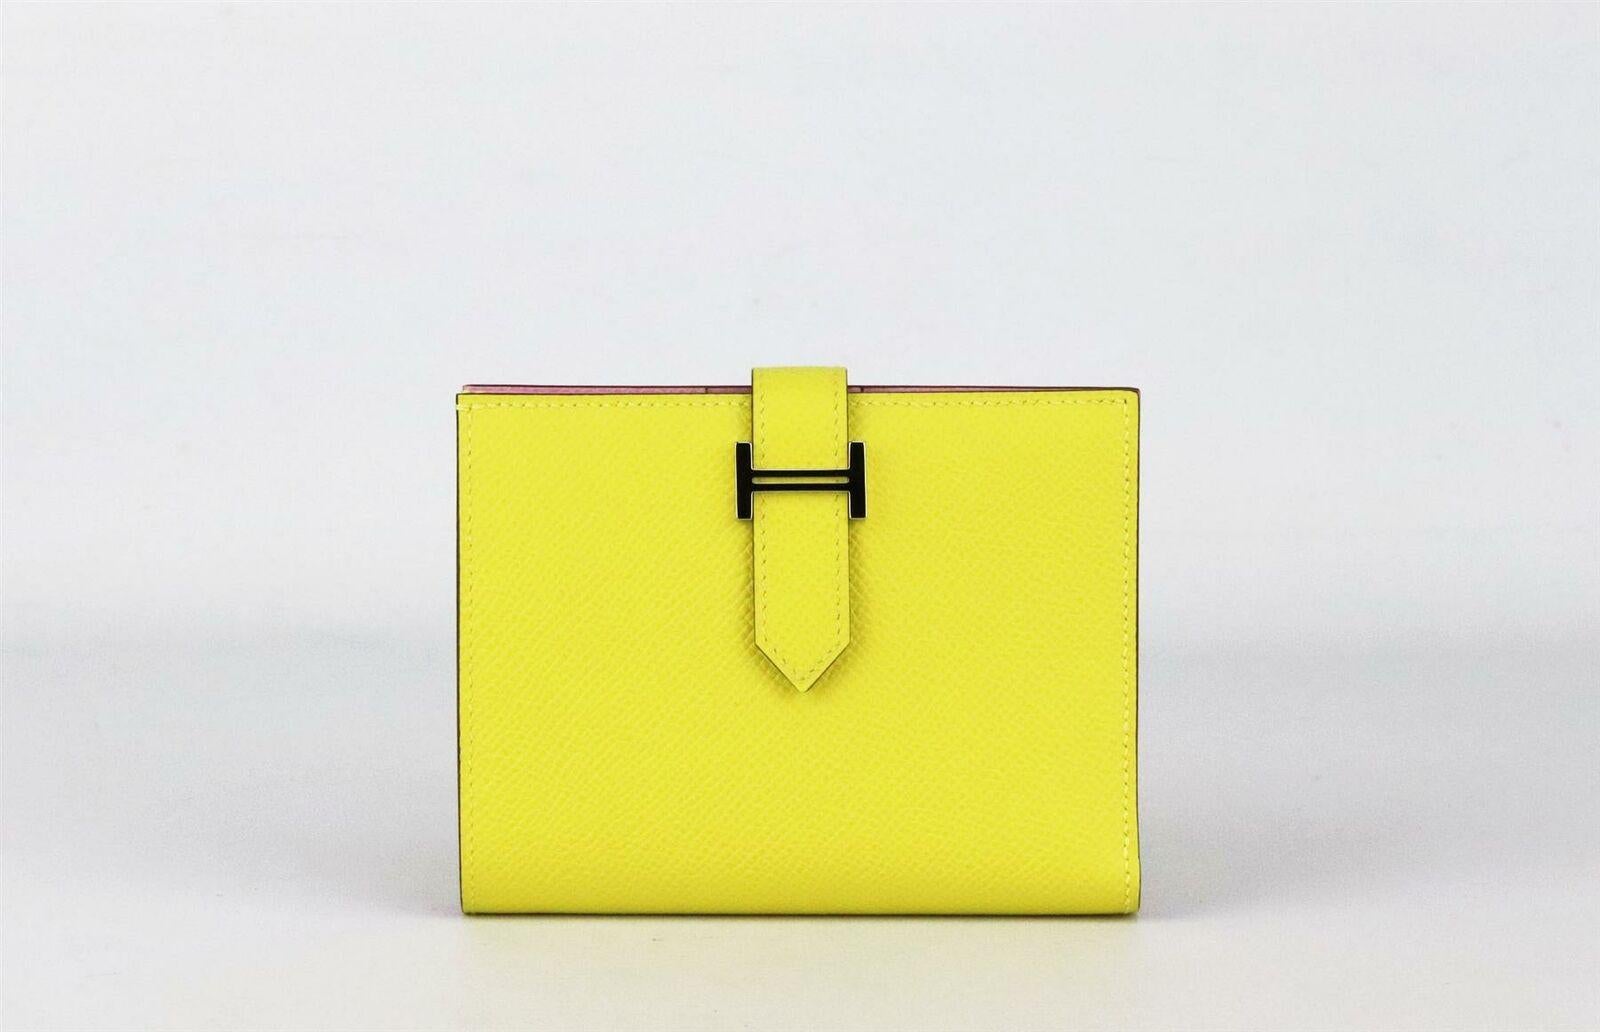 Made in France, this beautiful 2019 Hermès ‘Bearn Compact’ wallet has been made from textured Epsom leather exterior in ‘Lime’ and Epsom leather interior in ‘Mauve Silvestre’, it is decorated with palladium H hardware on the front and finished 4